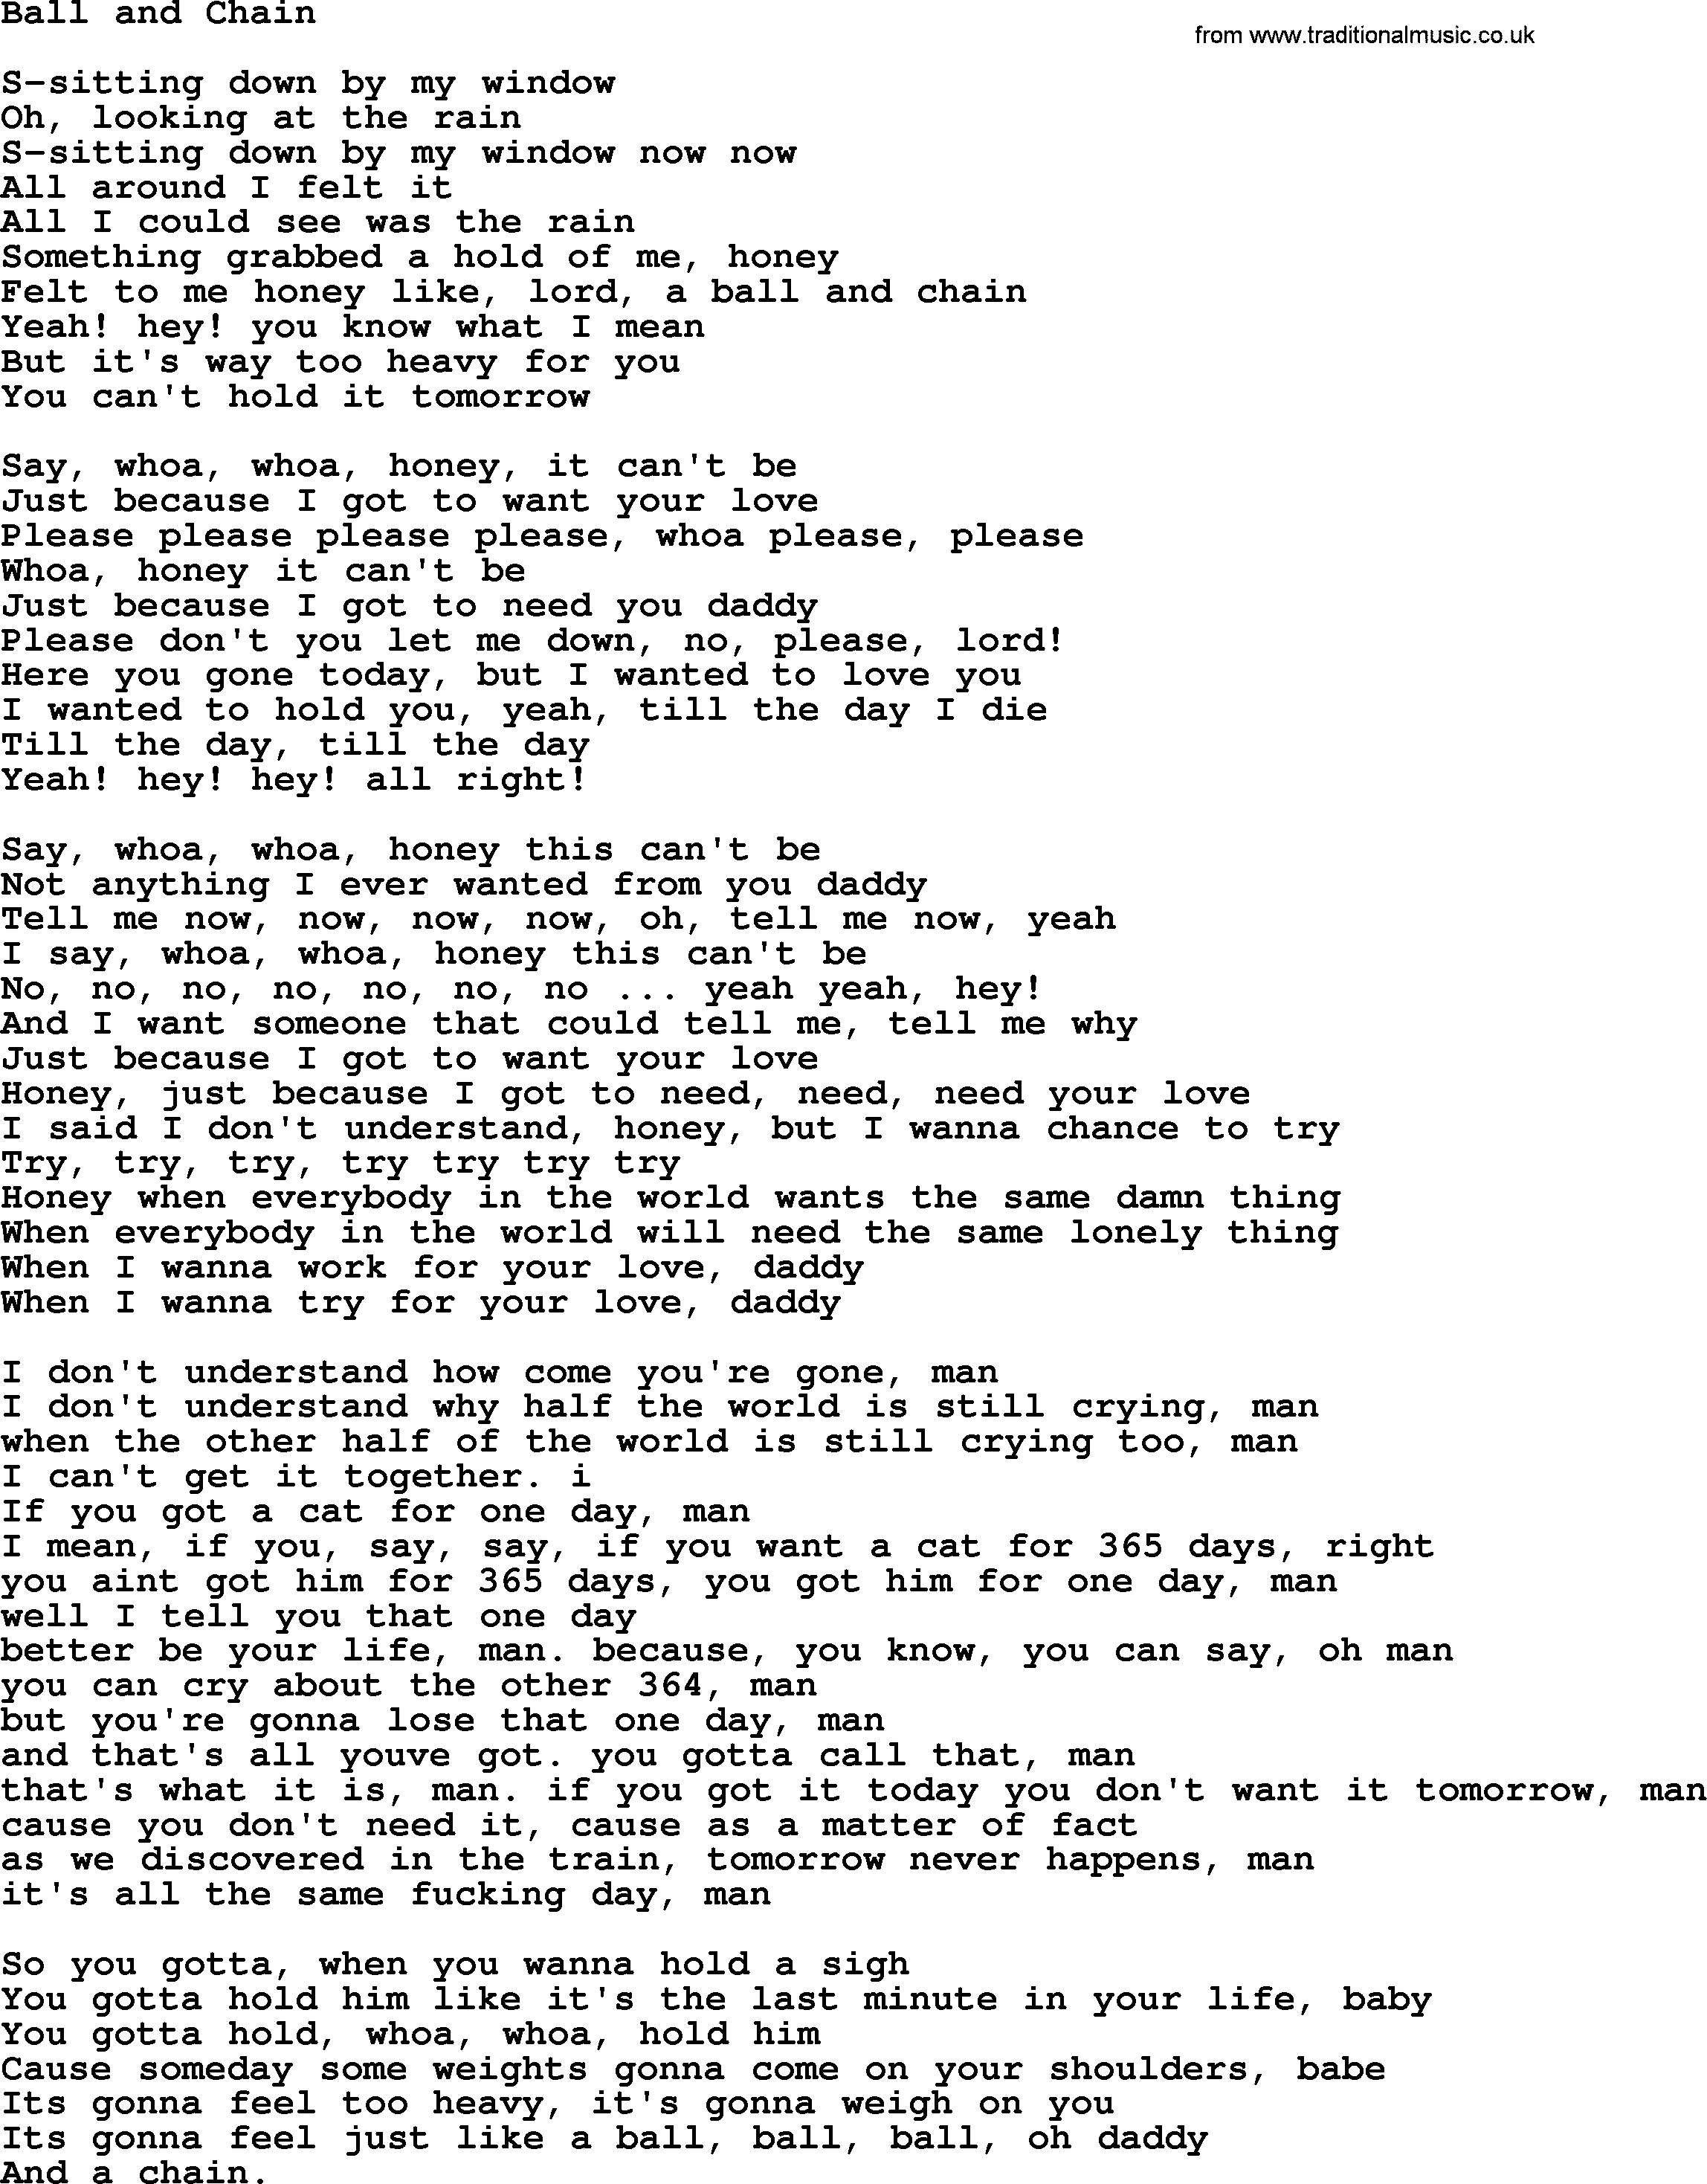 Ball And Chain, by The Byrds - lyrics with pdf